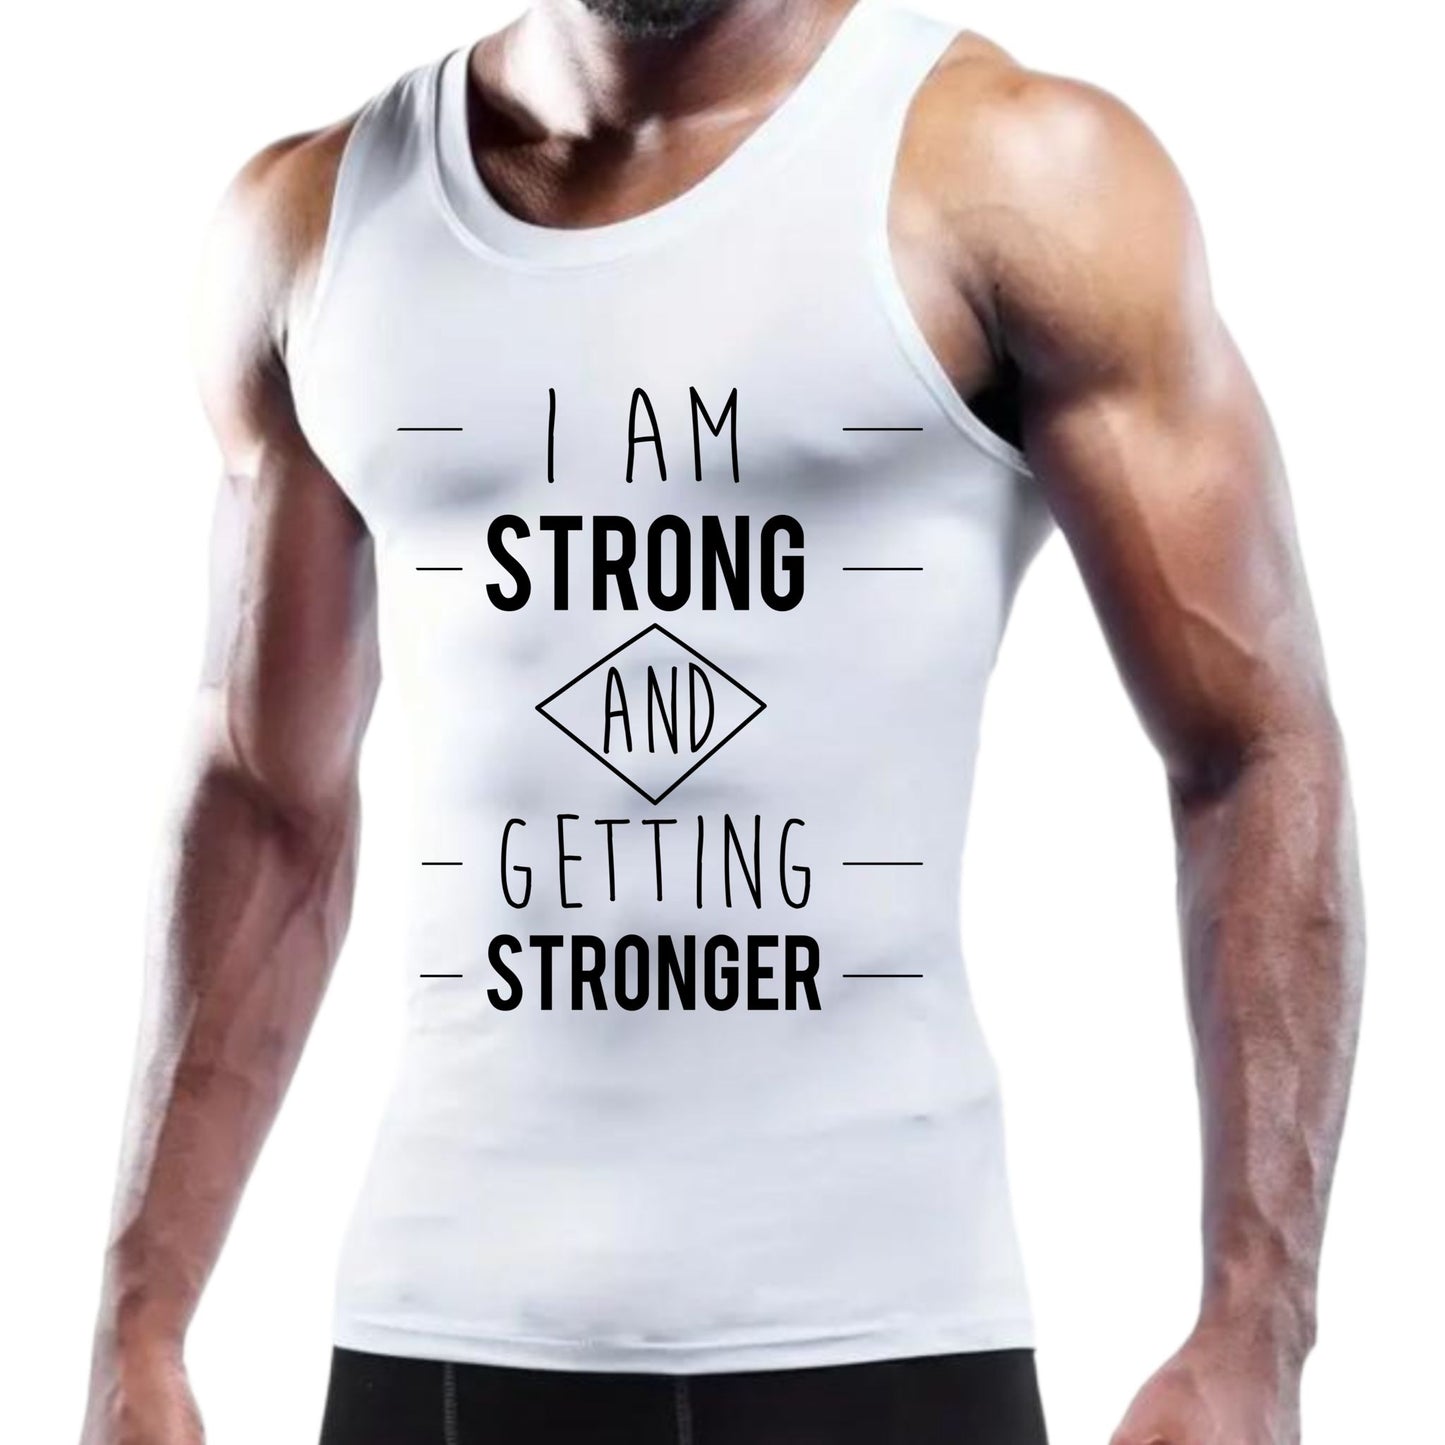 “I am strong and getting stronger” Tank Top